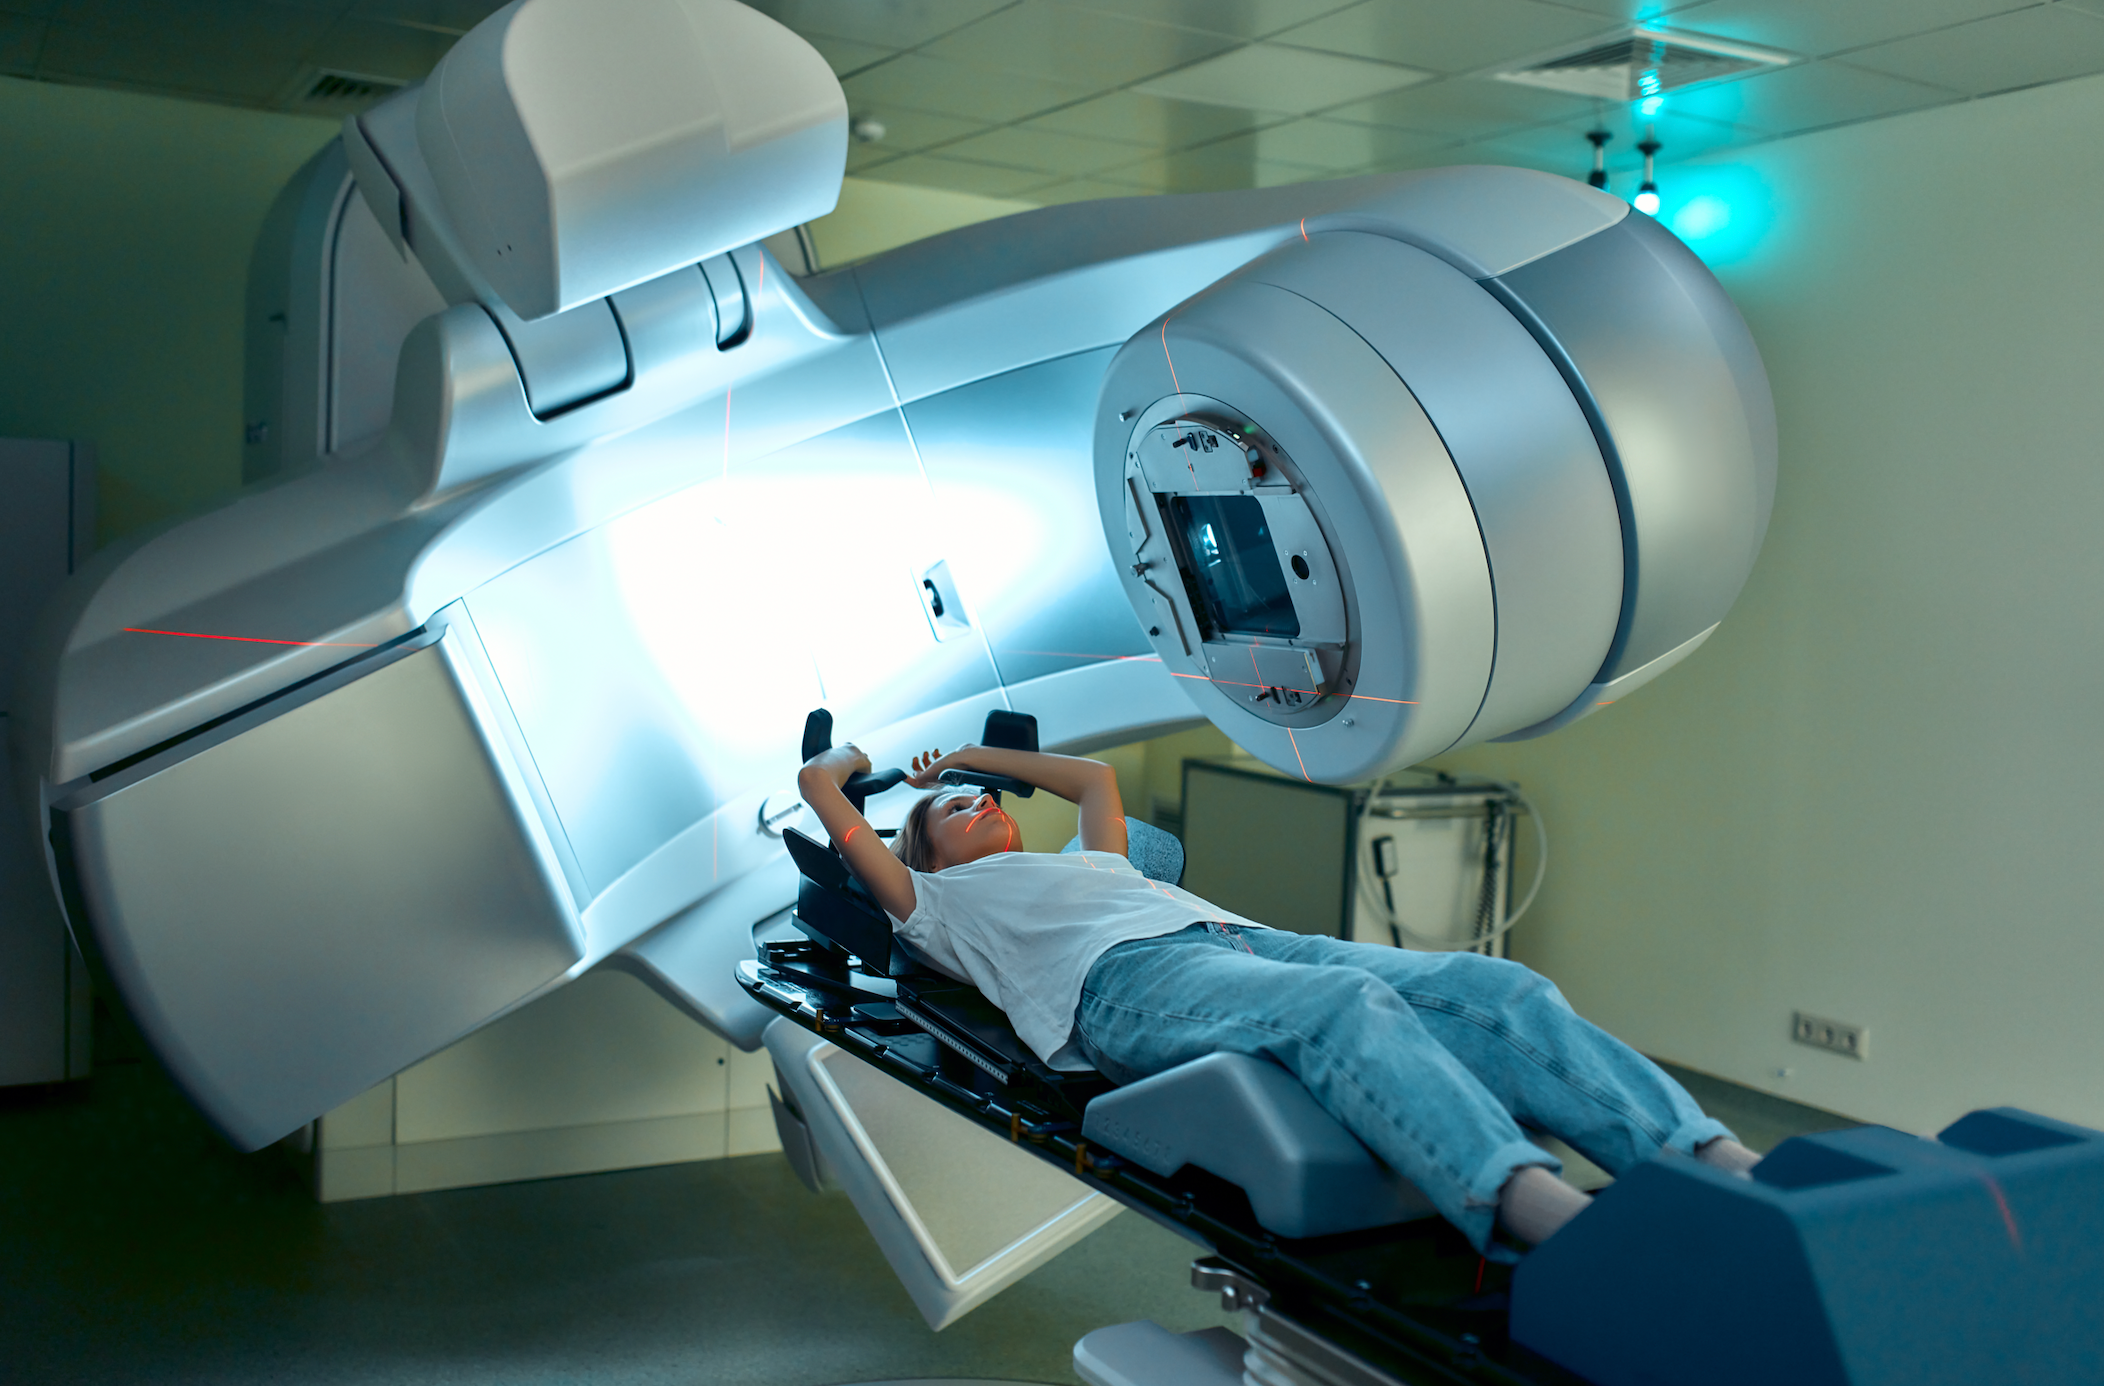  A young woman is undergoing radiation therapy for cancer in a modern cancer hospital. Cancer treatment, modern medical linear accelerator. | Image credit: © Valerii Apetroaiei - © stock.adobe.com